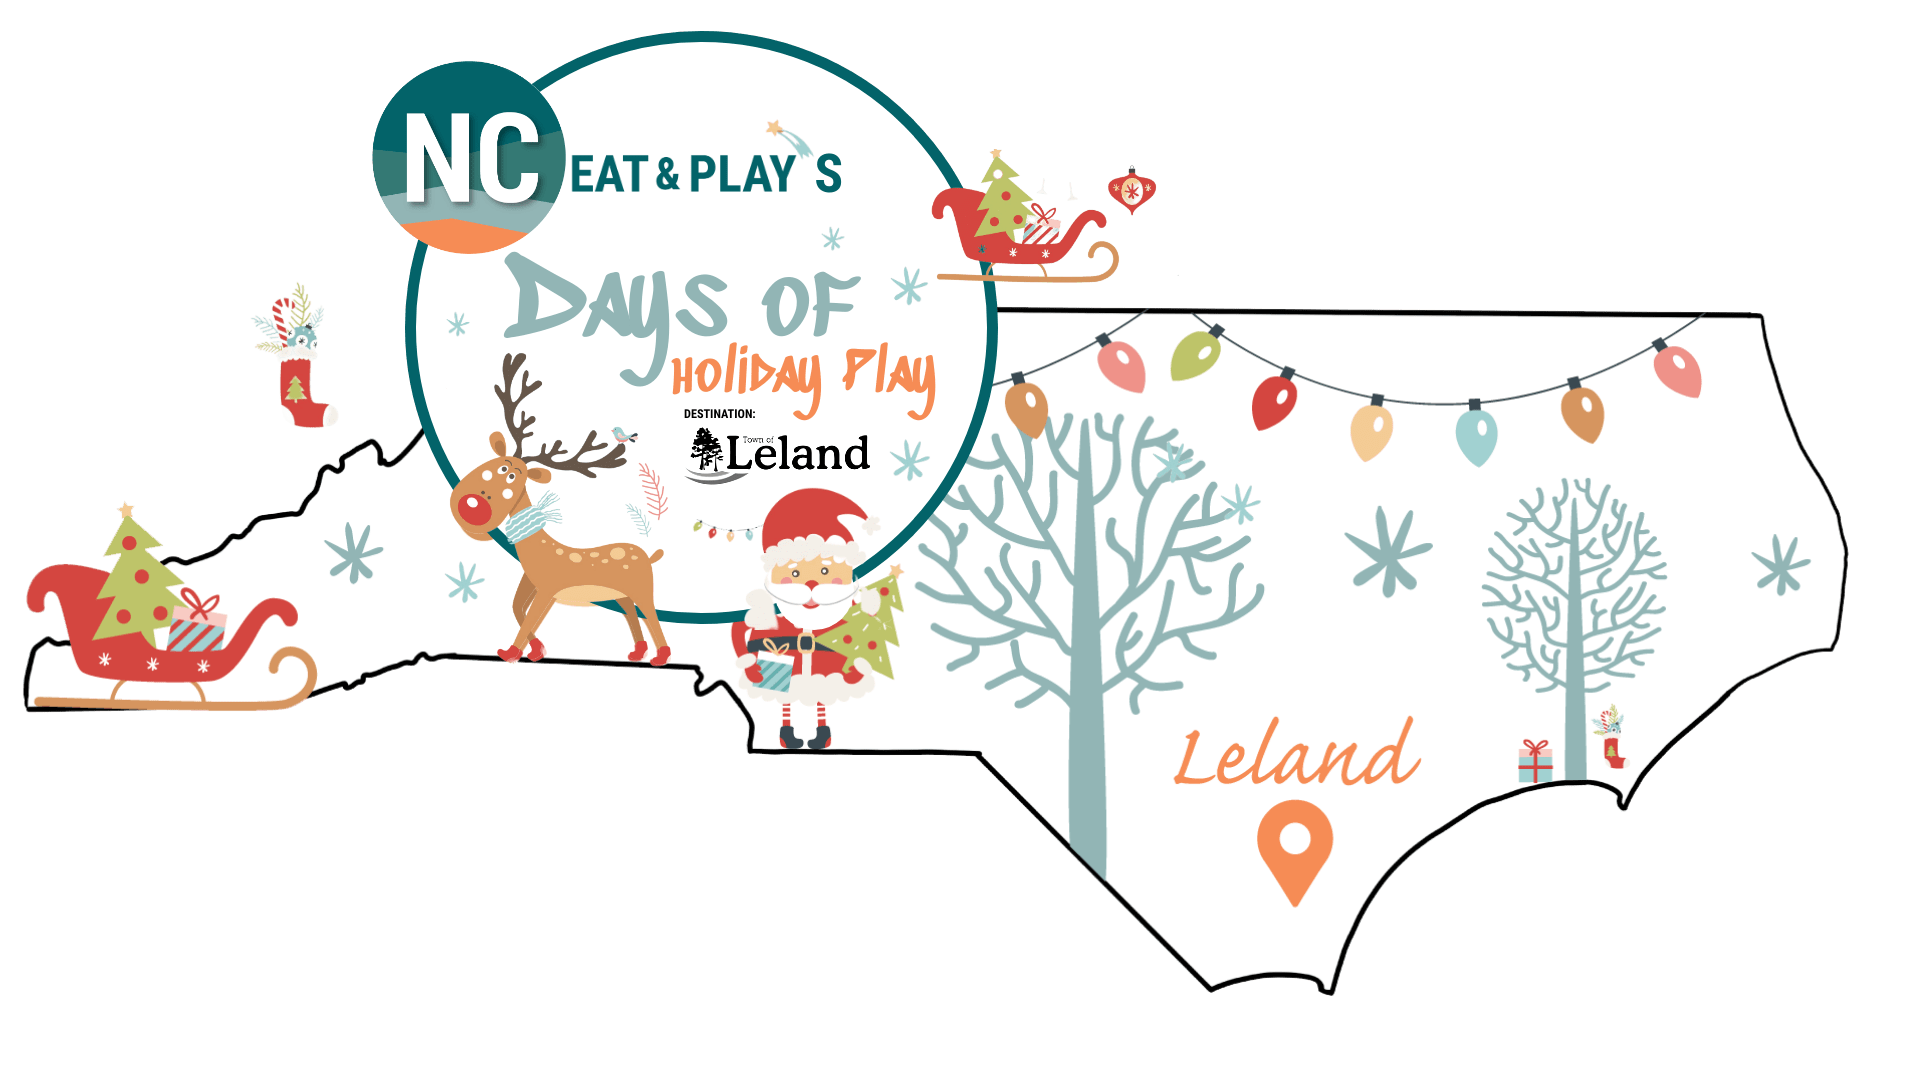 NC Eat & Play's Days of Holiday Play 